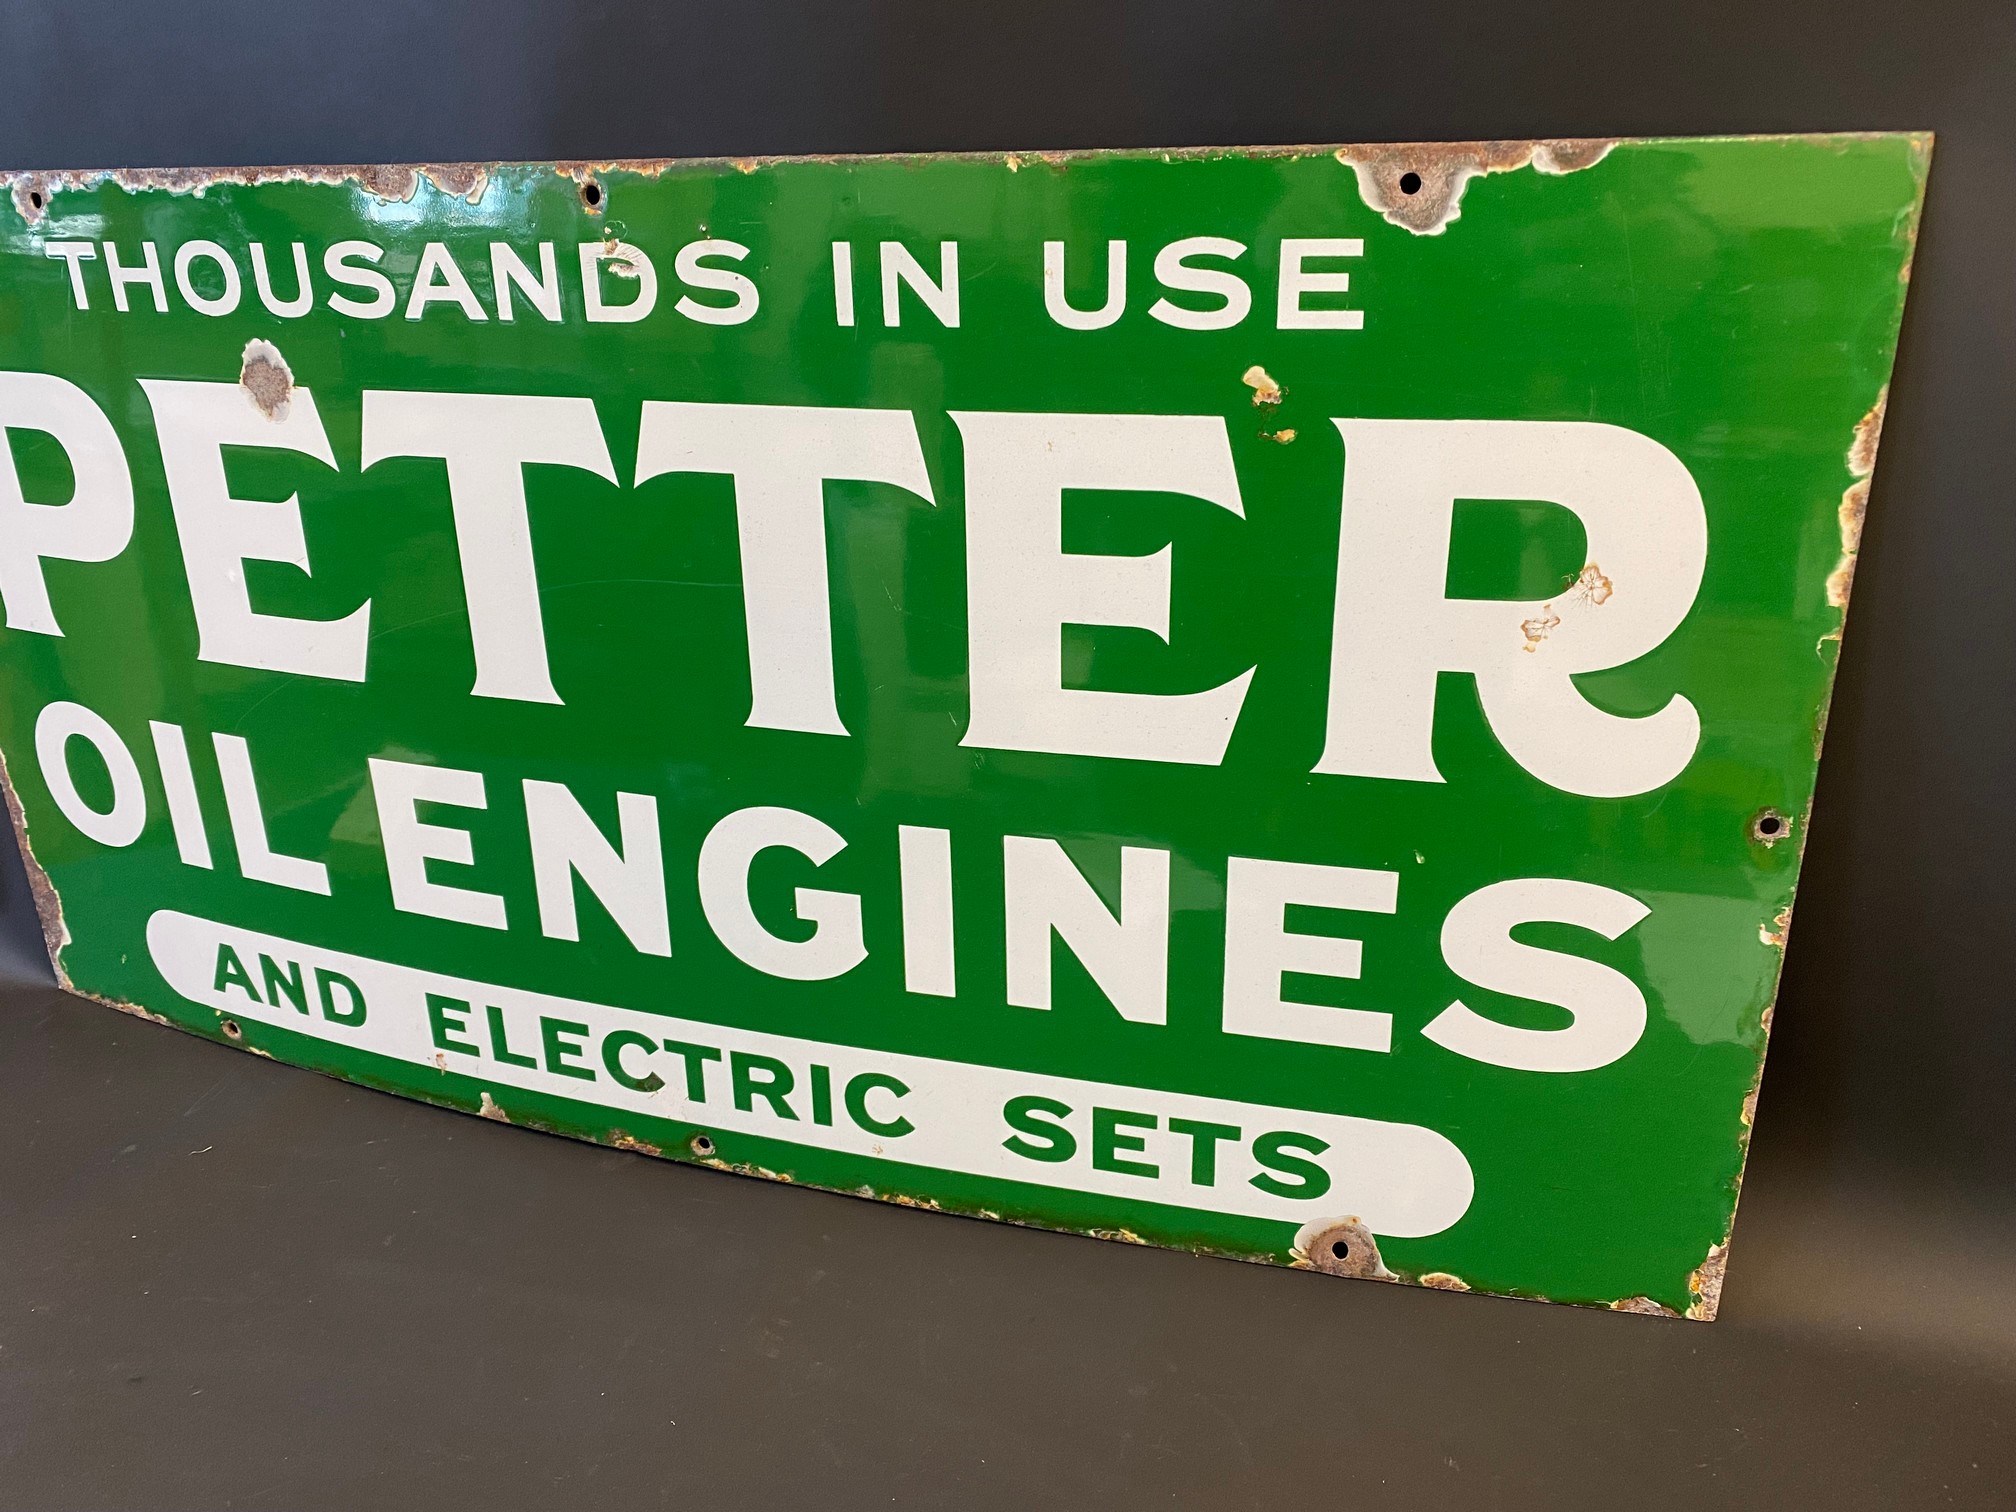 A Petter Oil Engines and Electric Sets, rectangular enamel sign with excellent gloss, 36 x 18". - Image 3 of 4